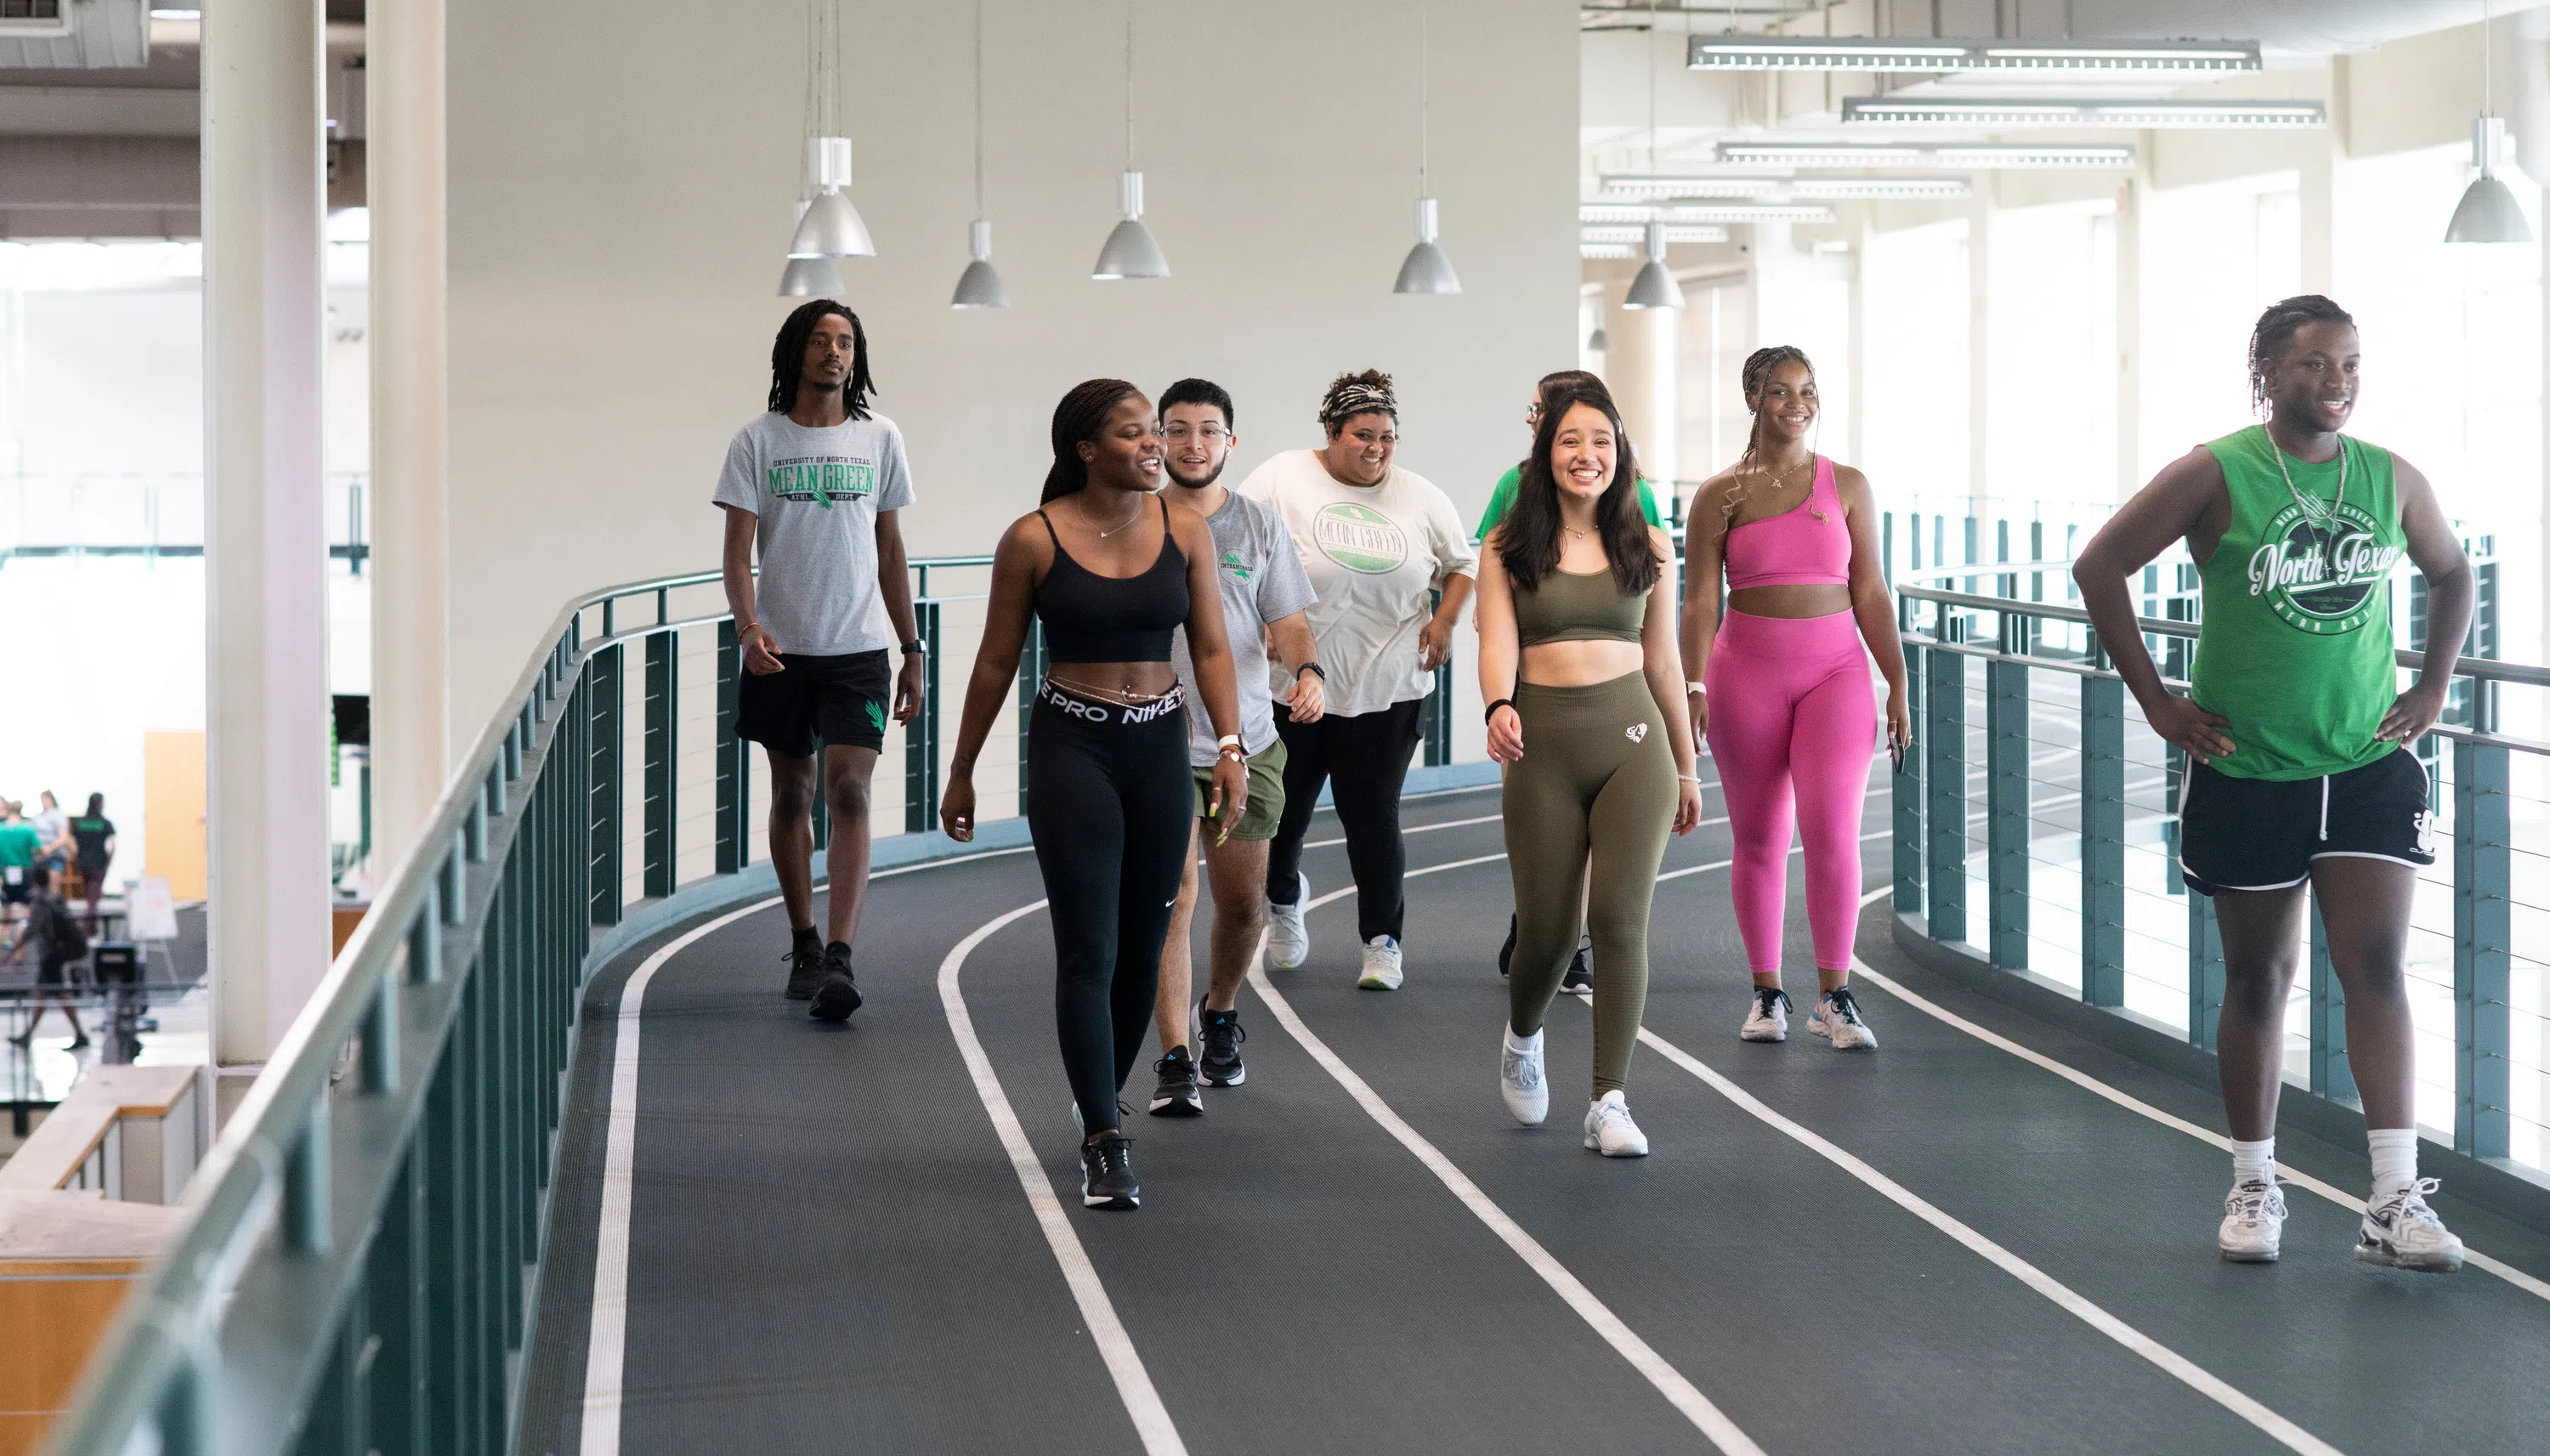 Students walk in a group on the indoor track